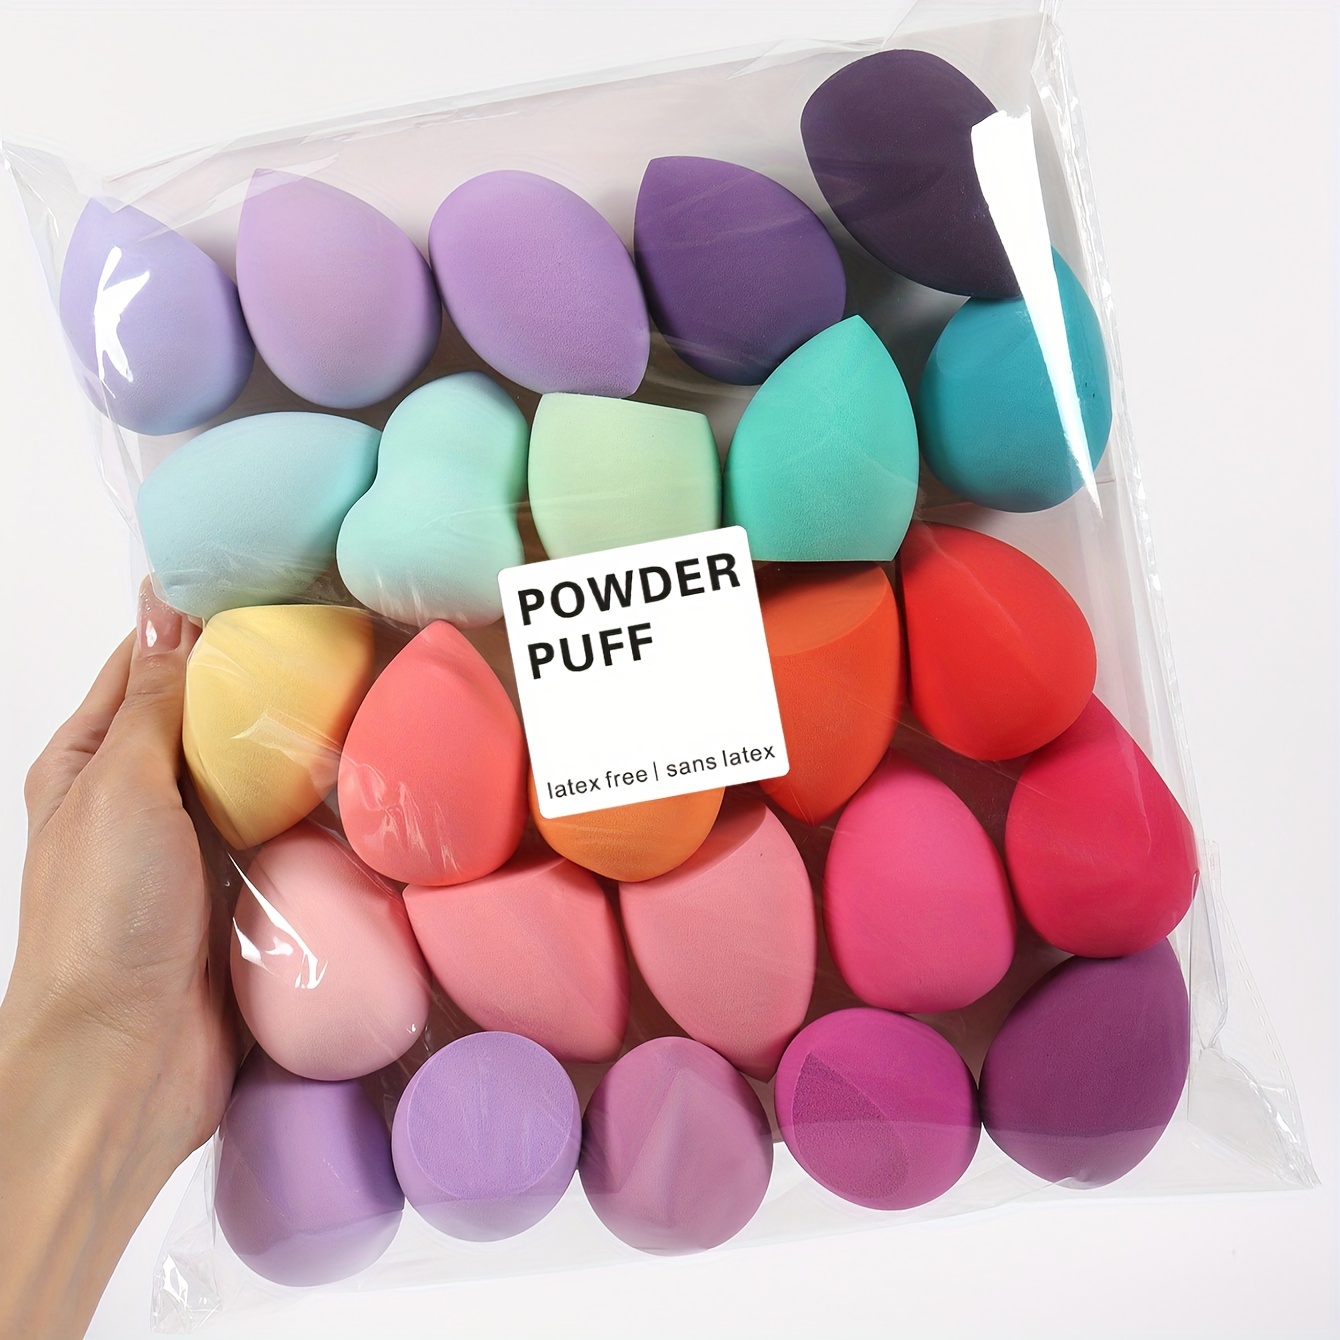 

20pcs Assorted Color & Shape Makeup Sponges, Latex-free Dry & Wet Dual-use Beauty Blenders For Flawless Foundation Blending, Multi-colored Cosmetic Puffs For All Skin Types